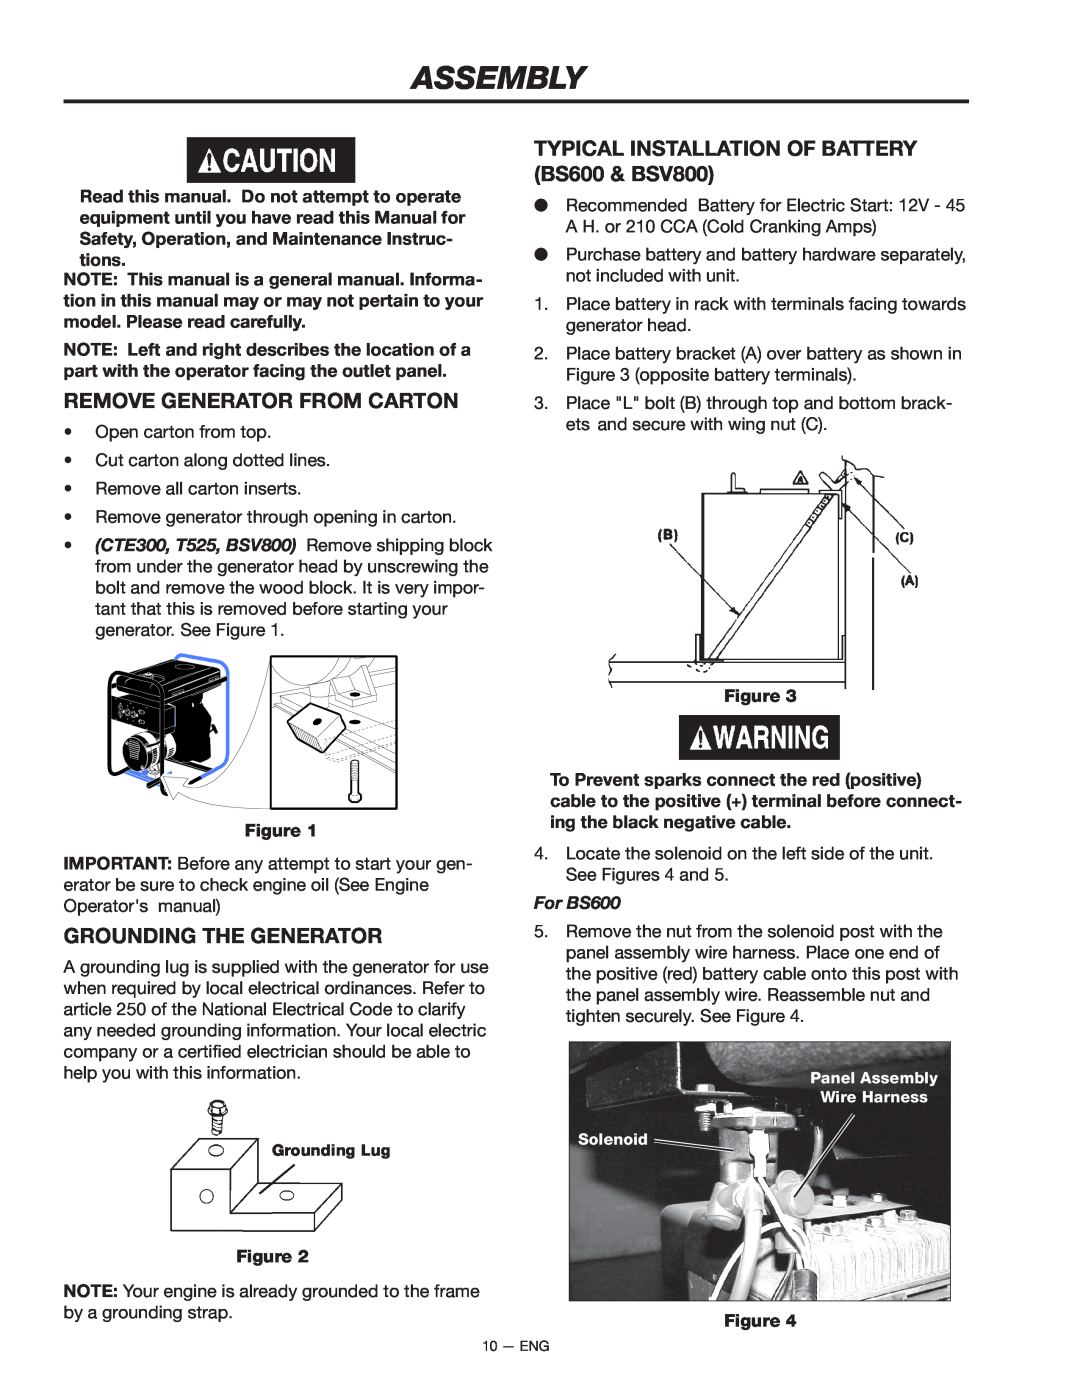 Porter-Cable T525, CTE300, BS600 instruction manual Assembly, Remove Generator From Carton, Grounding The Generator 